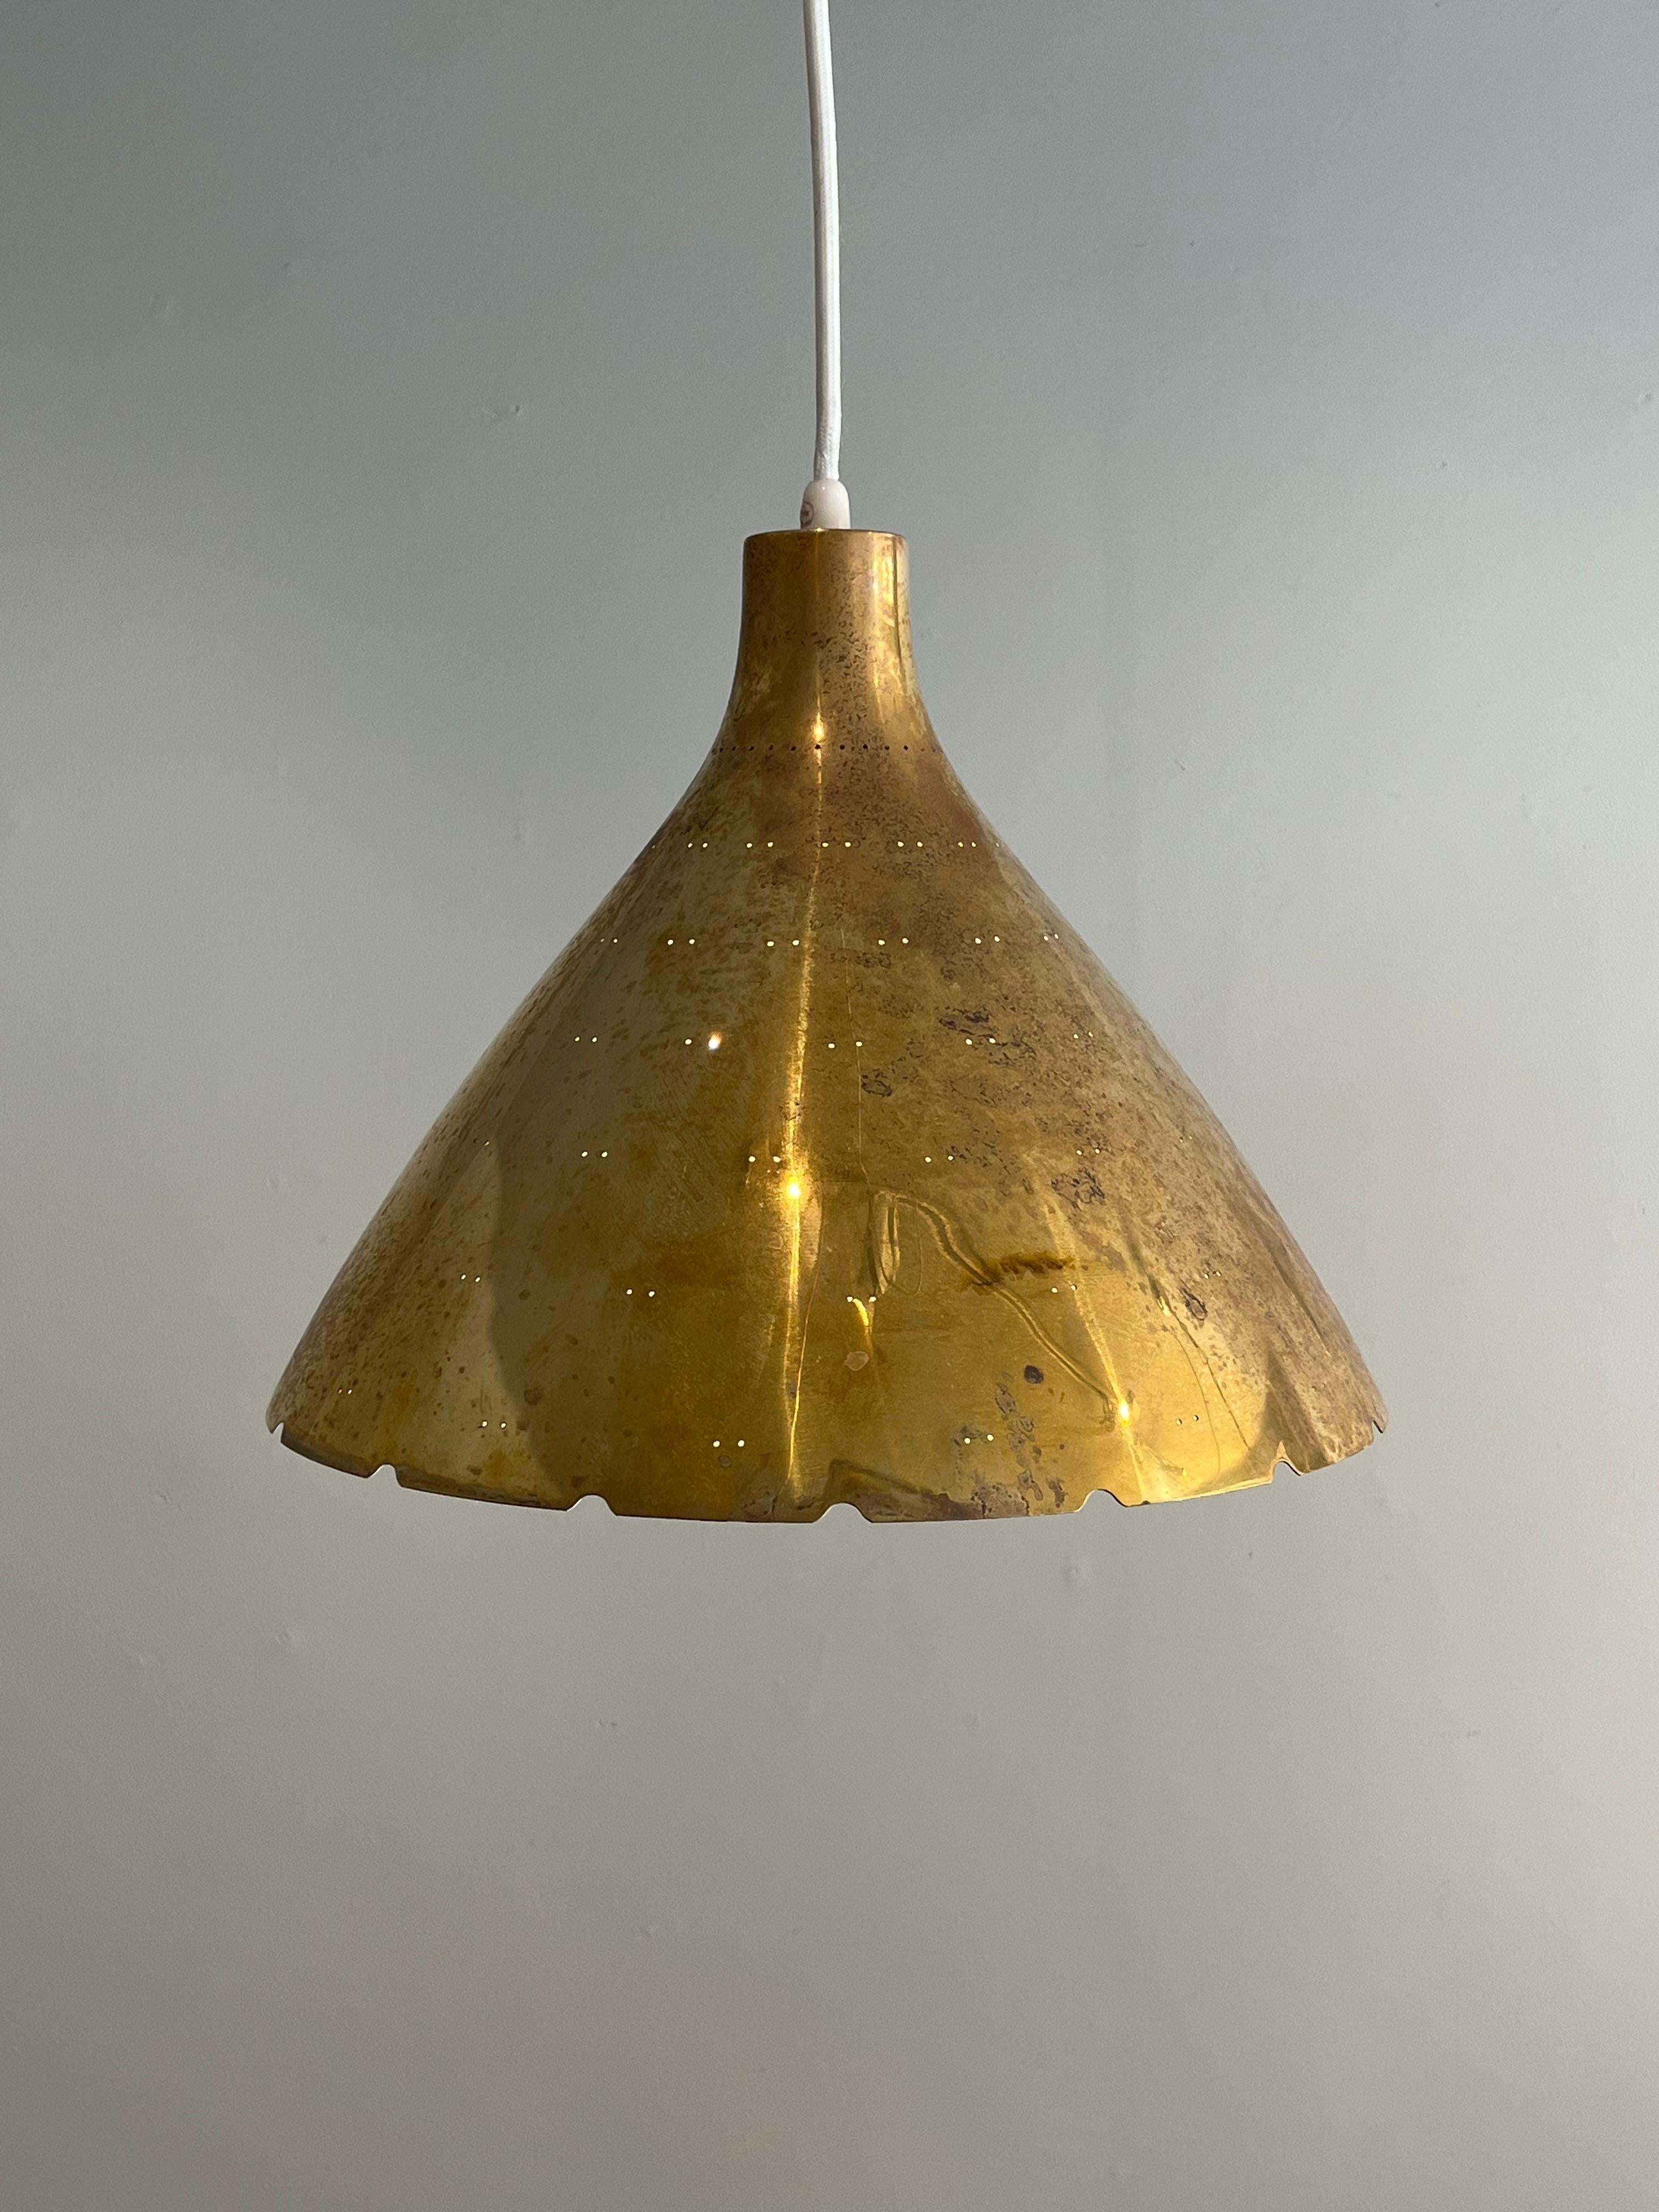 A large edition of the K2-46 brass chandelier by Paavo Tynell by Taito. 
The brass shade has twin dot perforations, scalloped edge detail, and a etched glass diffuser underneath. 
The overall length can be adjusted.
Made by Tiato Oy, Finland,